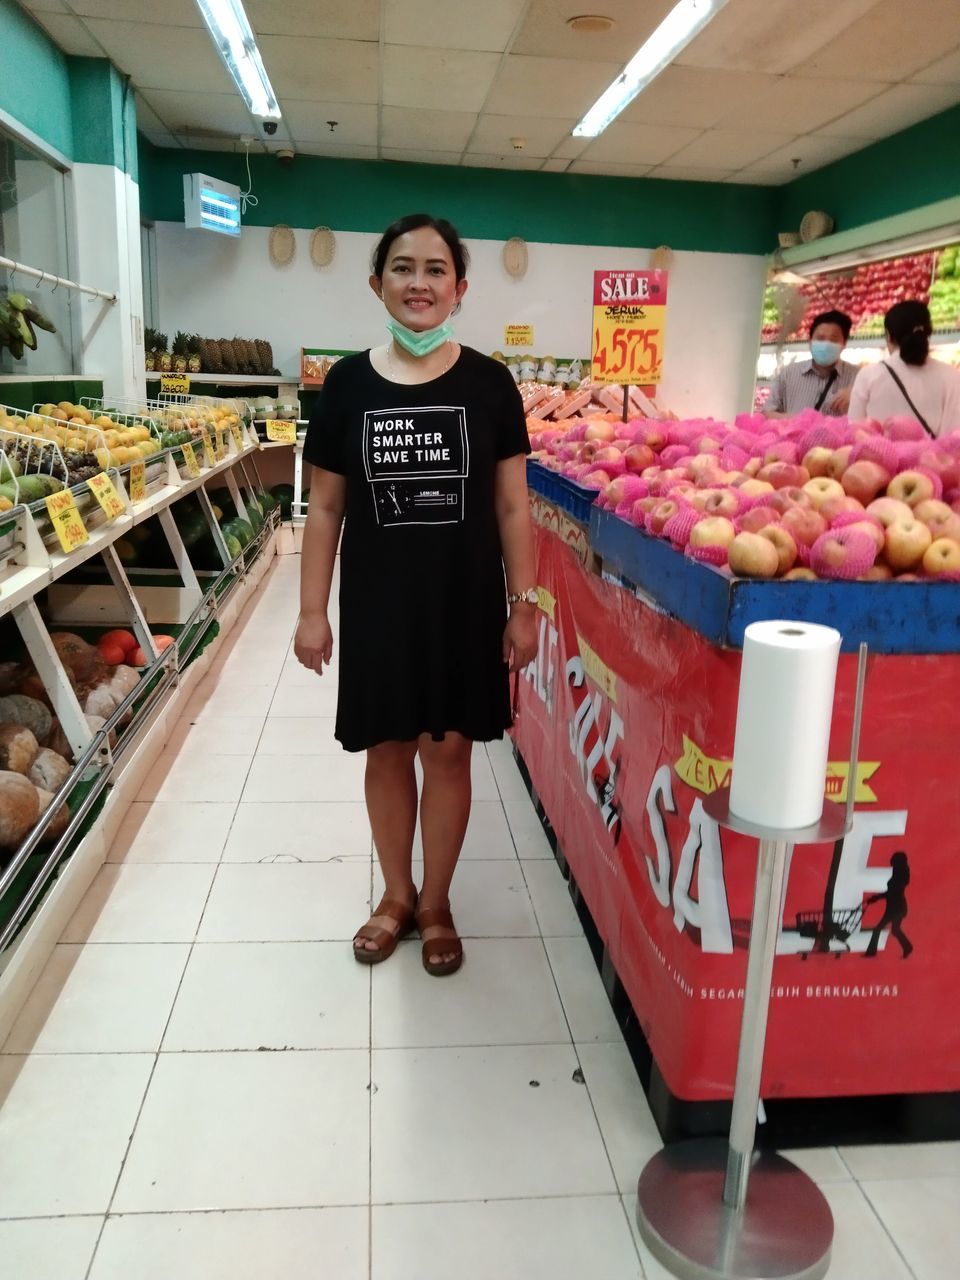 supermarket, looking at camera, one person, portrait, full length, store, retail, adult, food and drink, standing, food, front view, shopping, indoors, smiling, women, grocery store, young adult, business, building, consumerism, emotion, clothing, happiness, customer, person, market, occupation, female